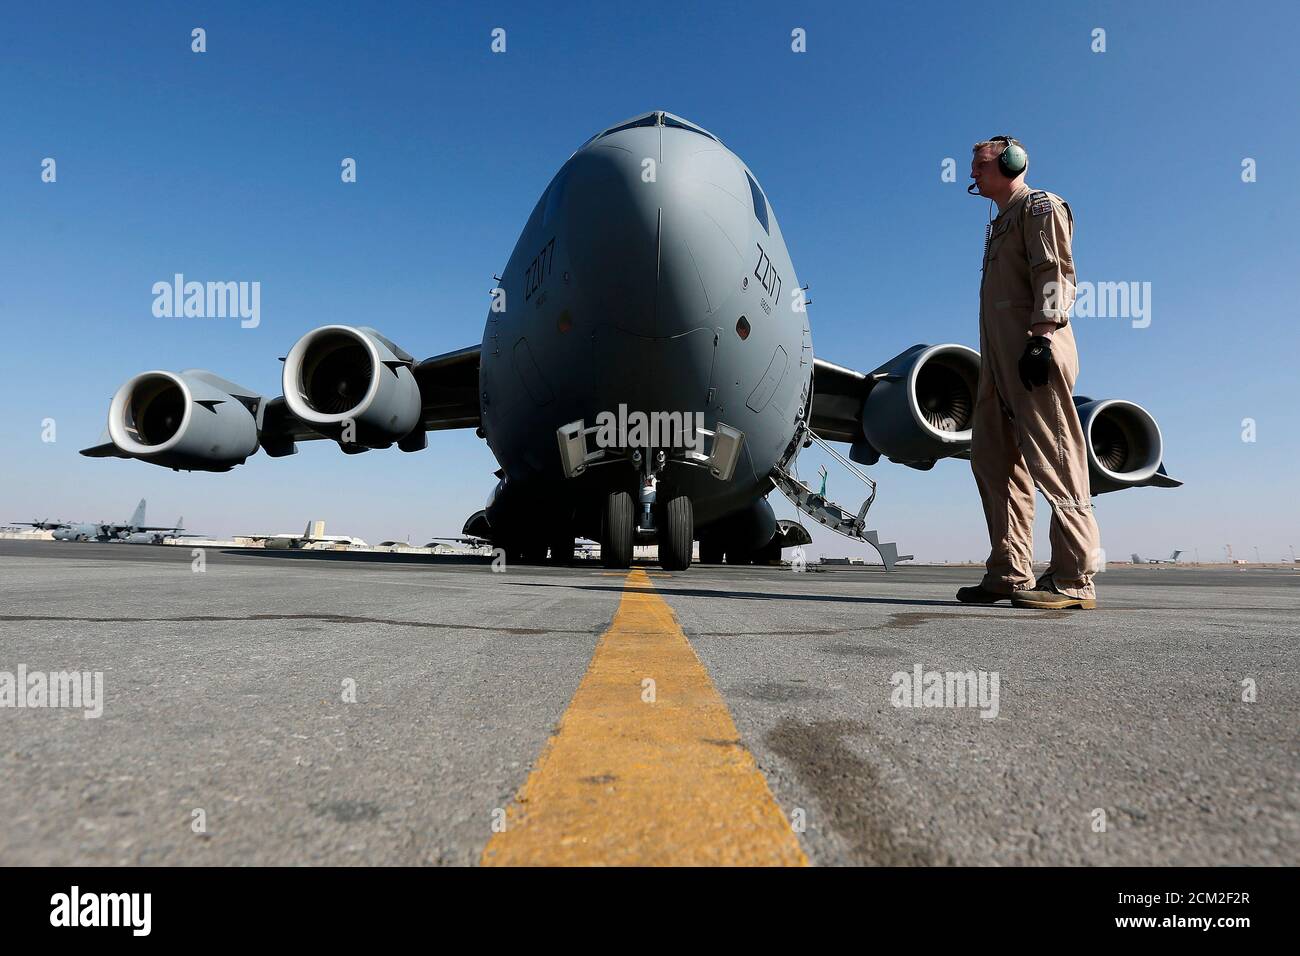 A British soldier stands in front of a Royal Airforce  C-17 Globemaster III aircraft at a Kandahar airfield, Afghanistan December 20, 2012. REUTERS/Stefan Wermuth (AFGHANISTAN - Tags: TRANSPORT MILITARY CONFLICT) Stock Photo